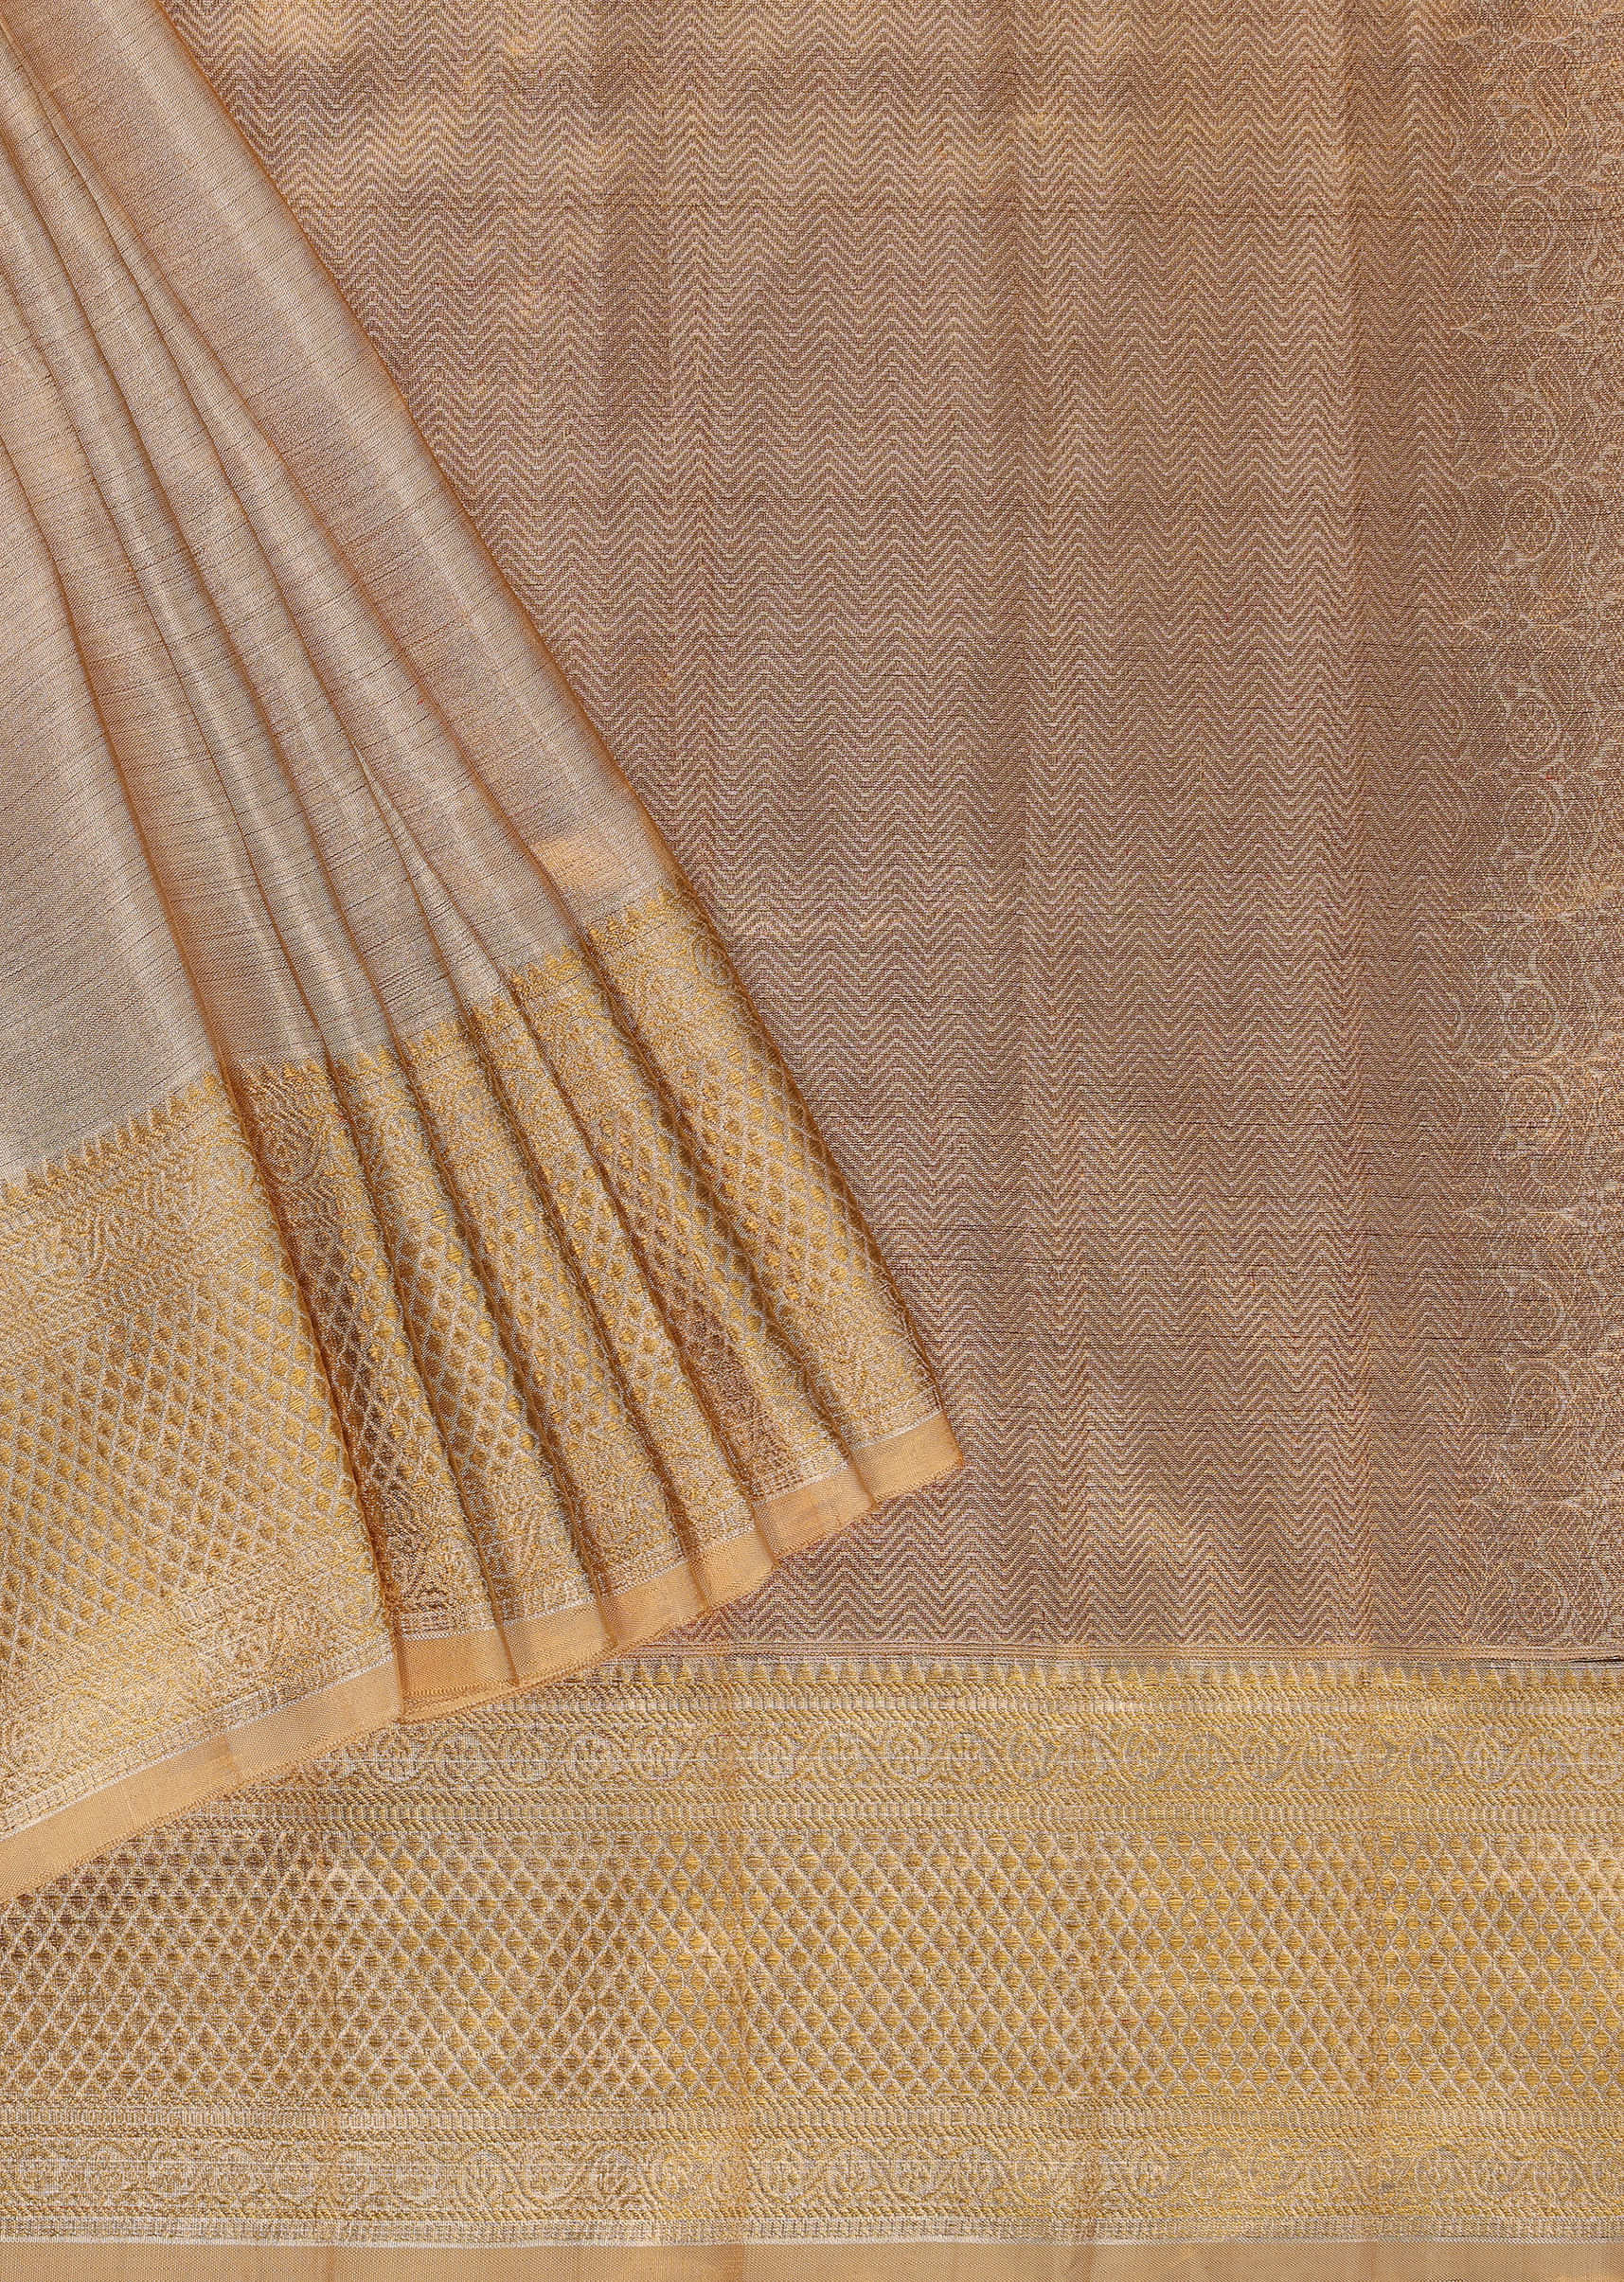 Beige White Tissue Saree With 7gm Real Zari In Luminous Gold Hue